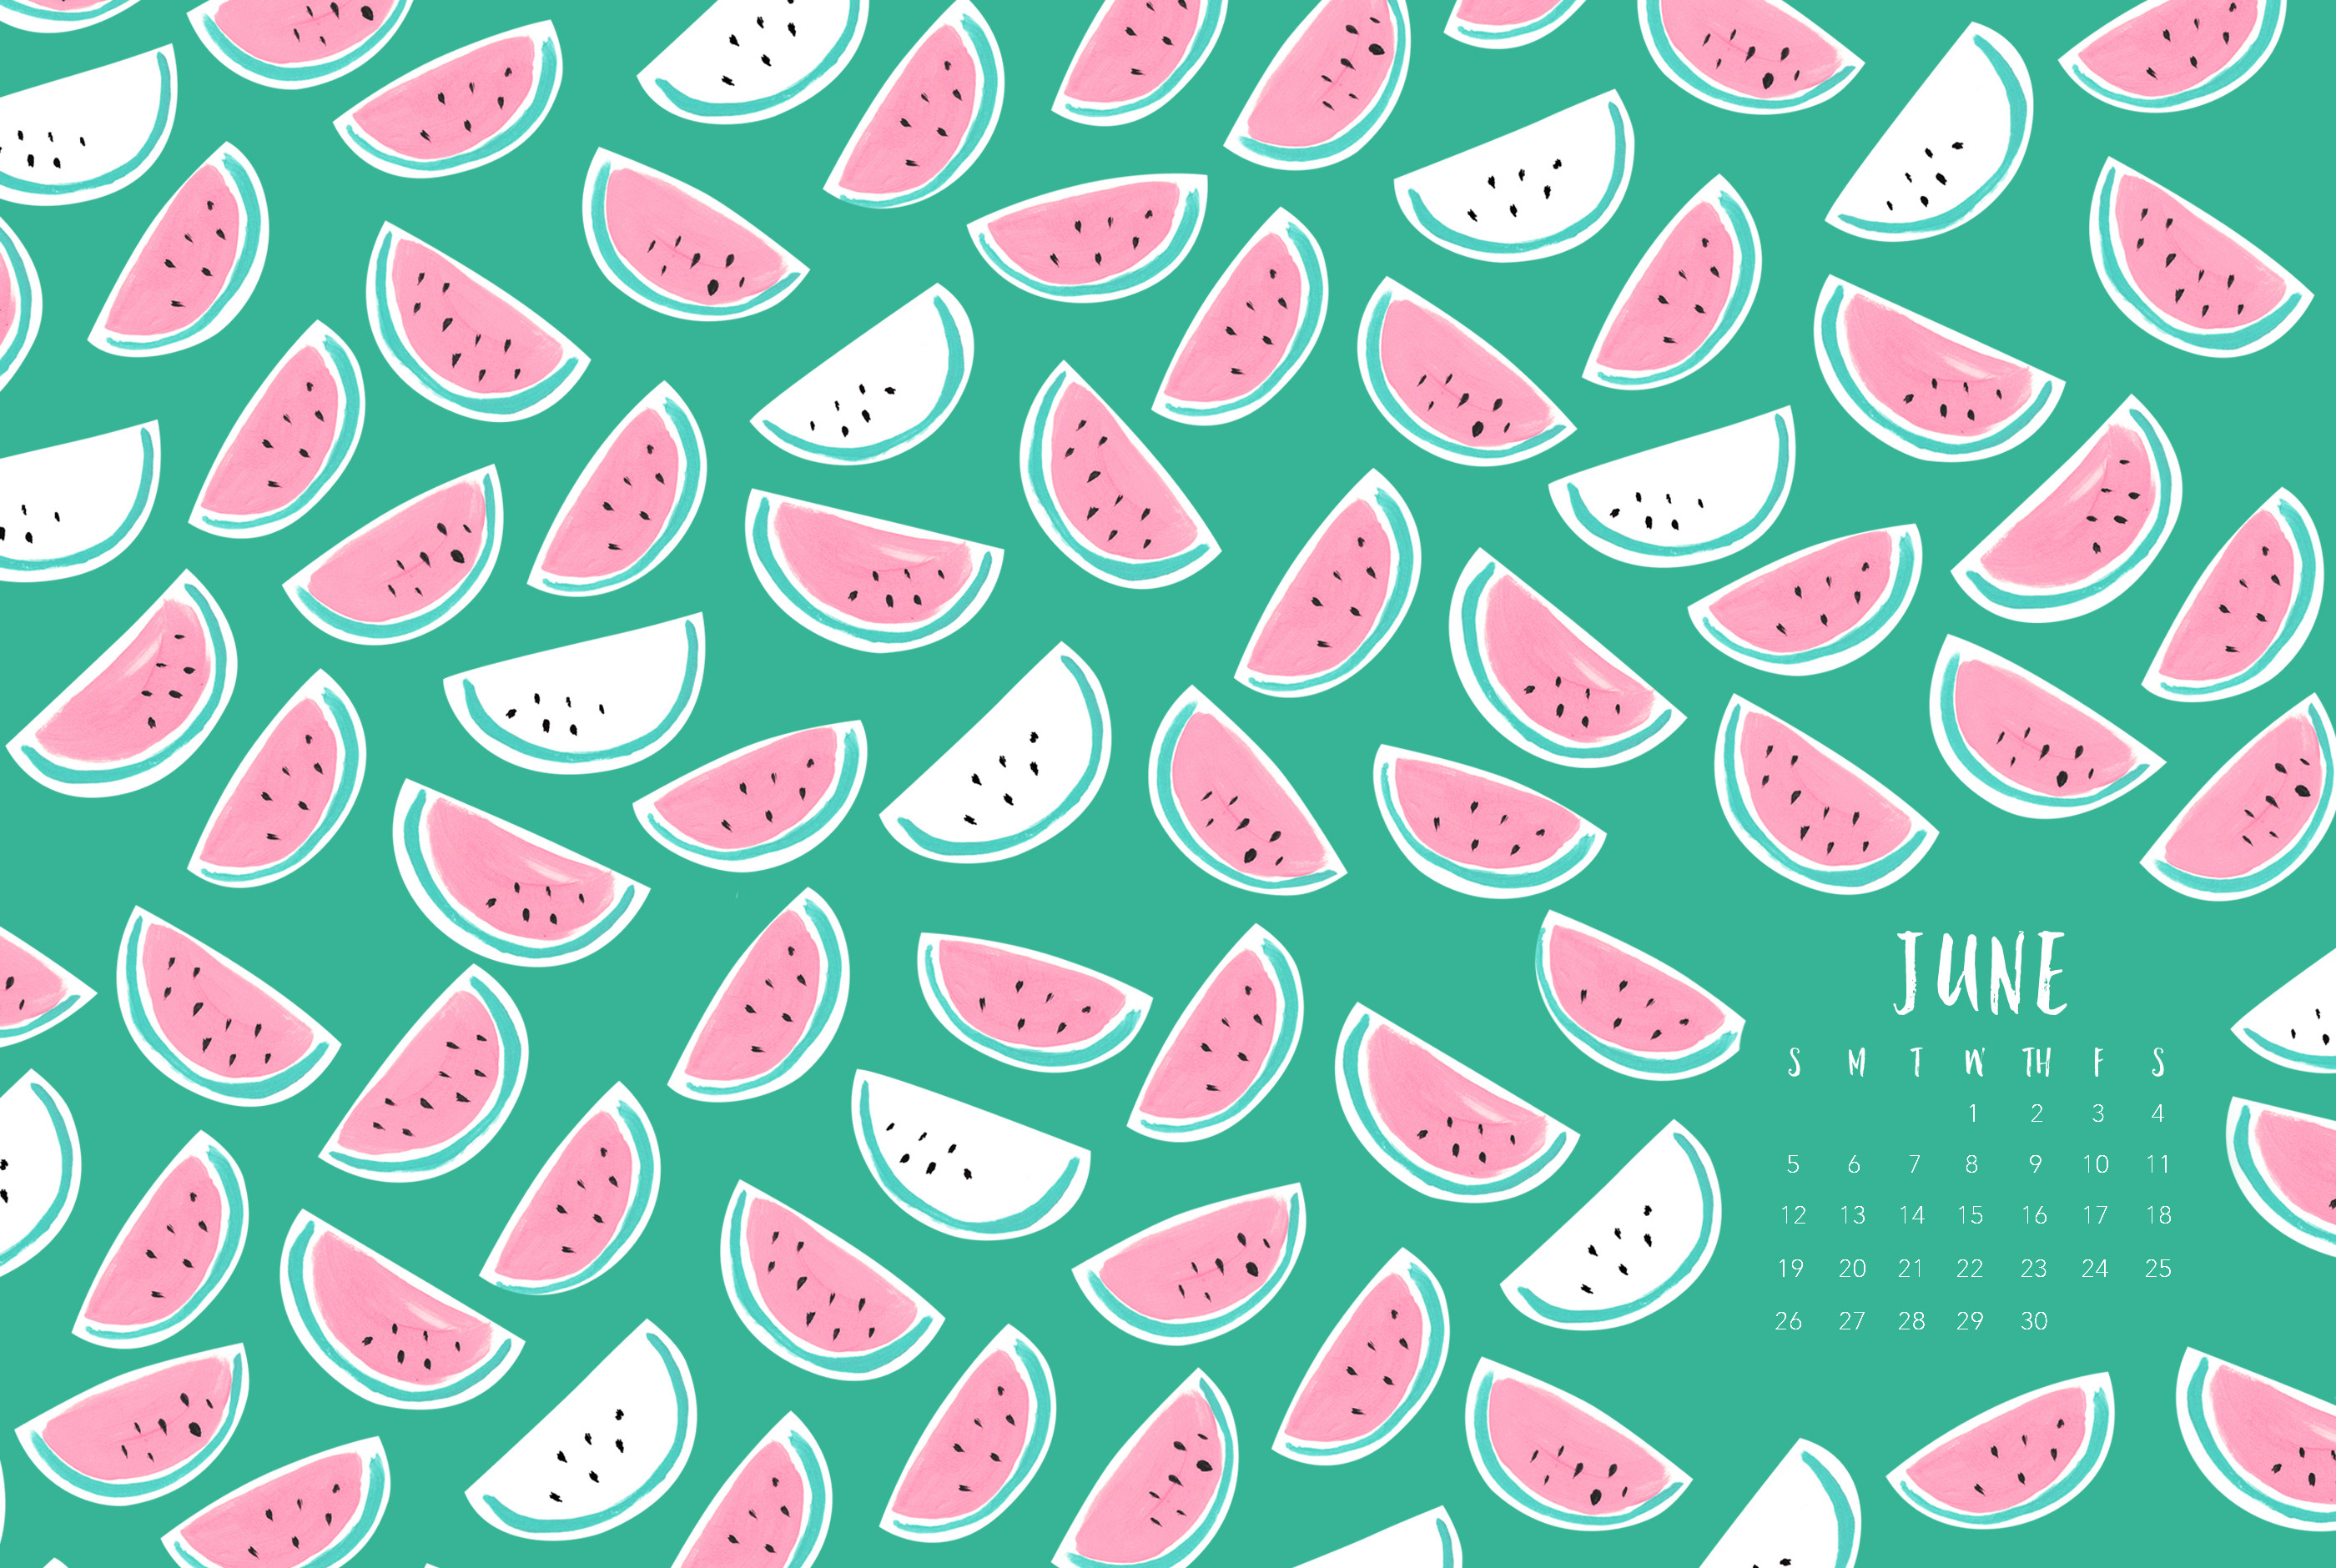 2800x1880 Free digital wallpapers from May Designs. These patterned desktop and  iPhone backgrounds are perfect for your devices!